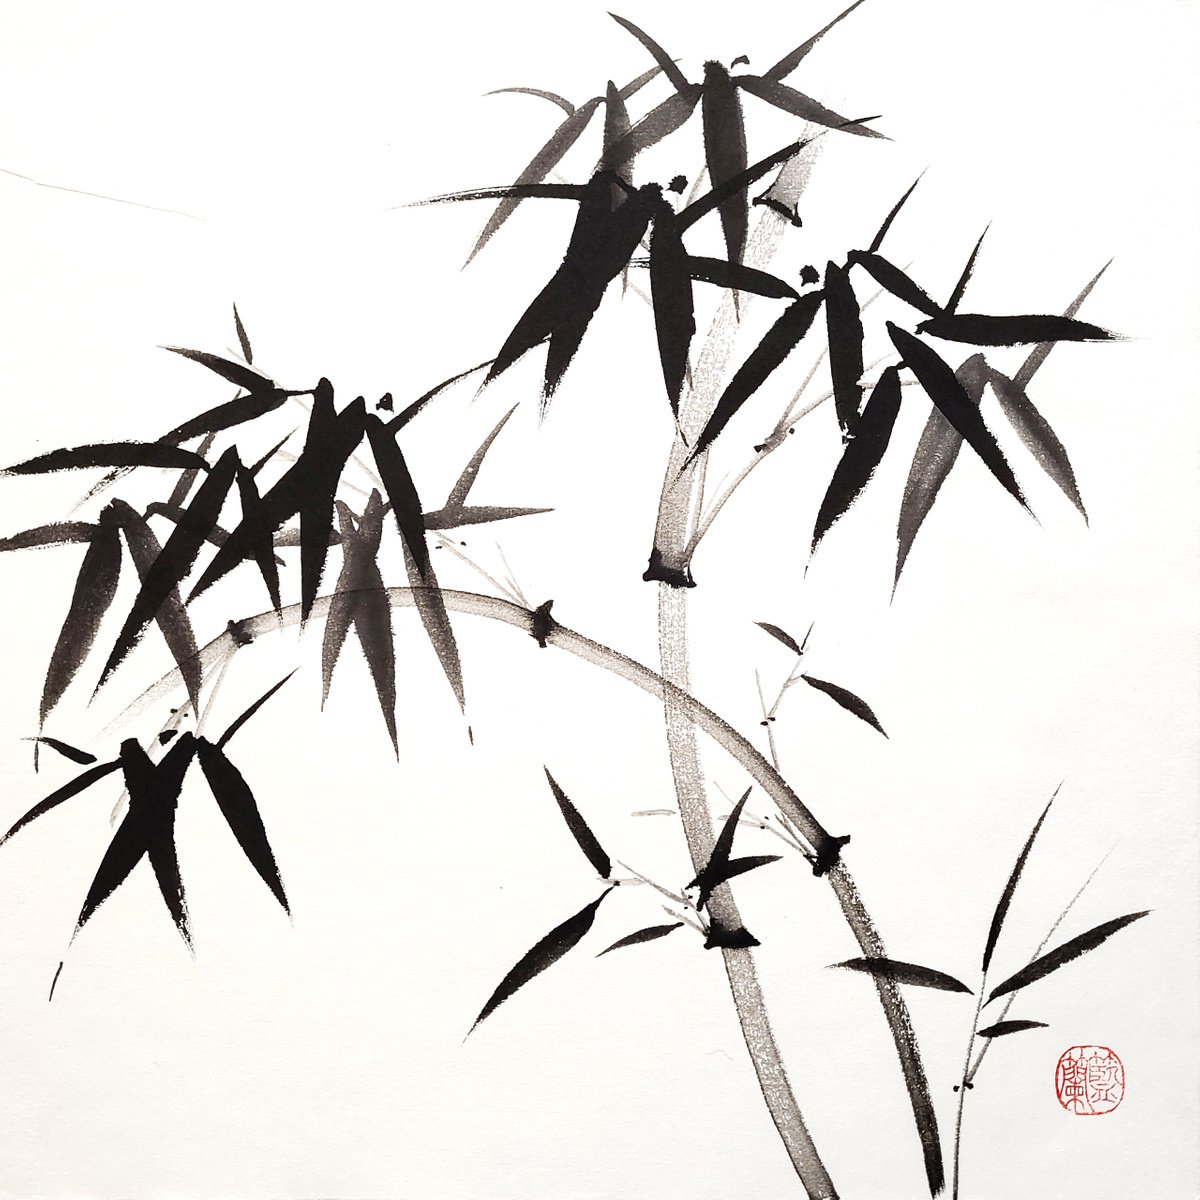 Two intersecting bamboo trunks  - Bamboo series No. 2113 - Oriental Chinese Ink Painting by Ilana Shechter